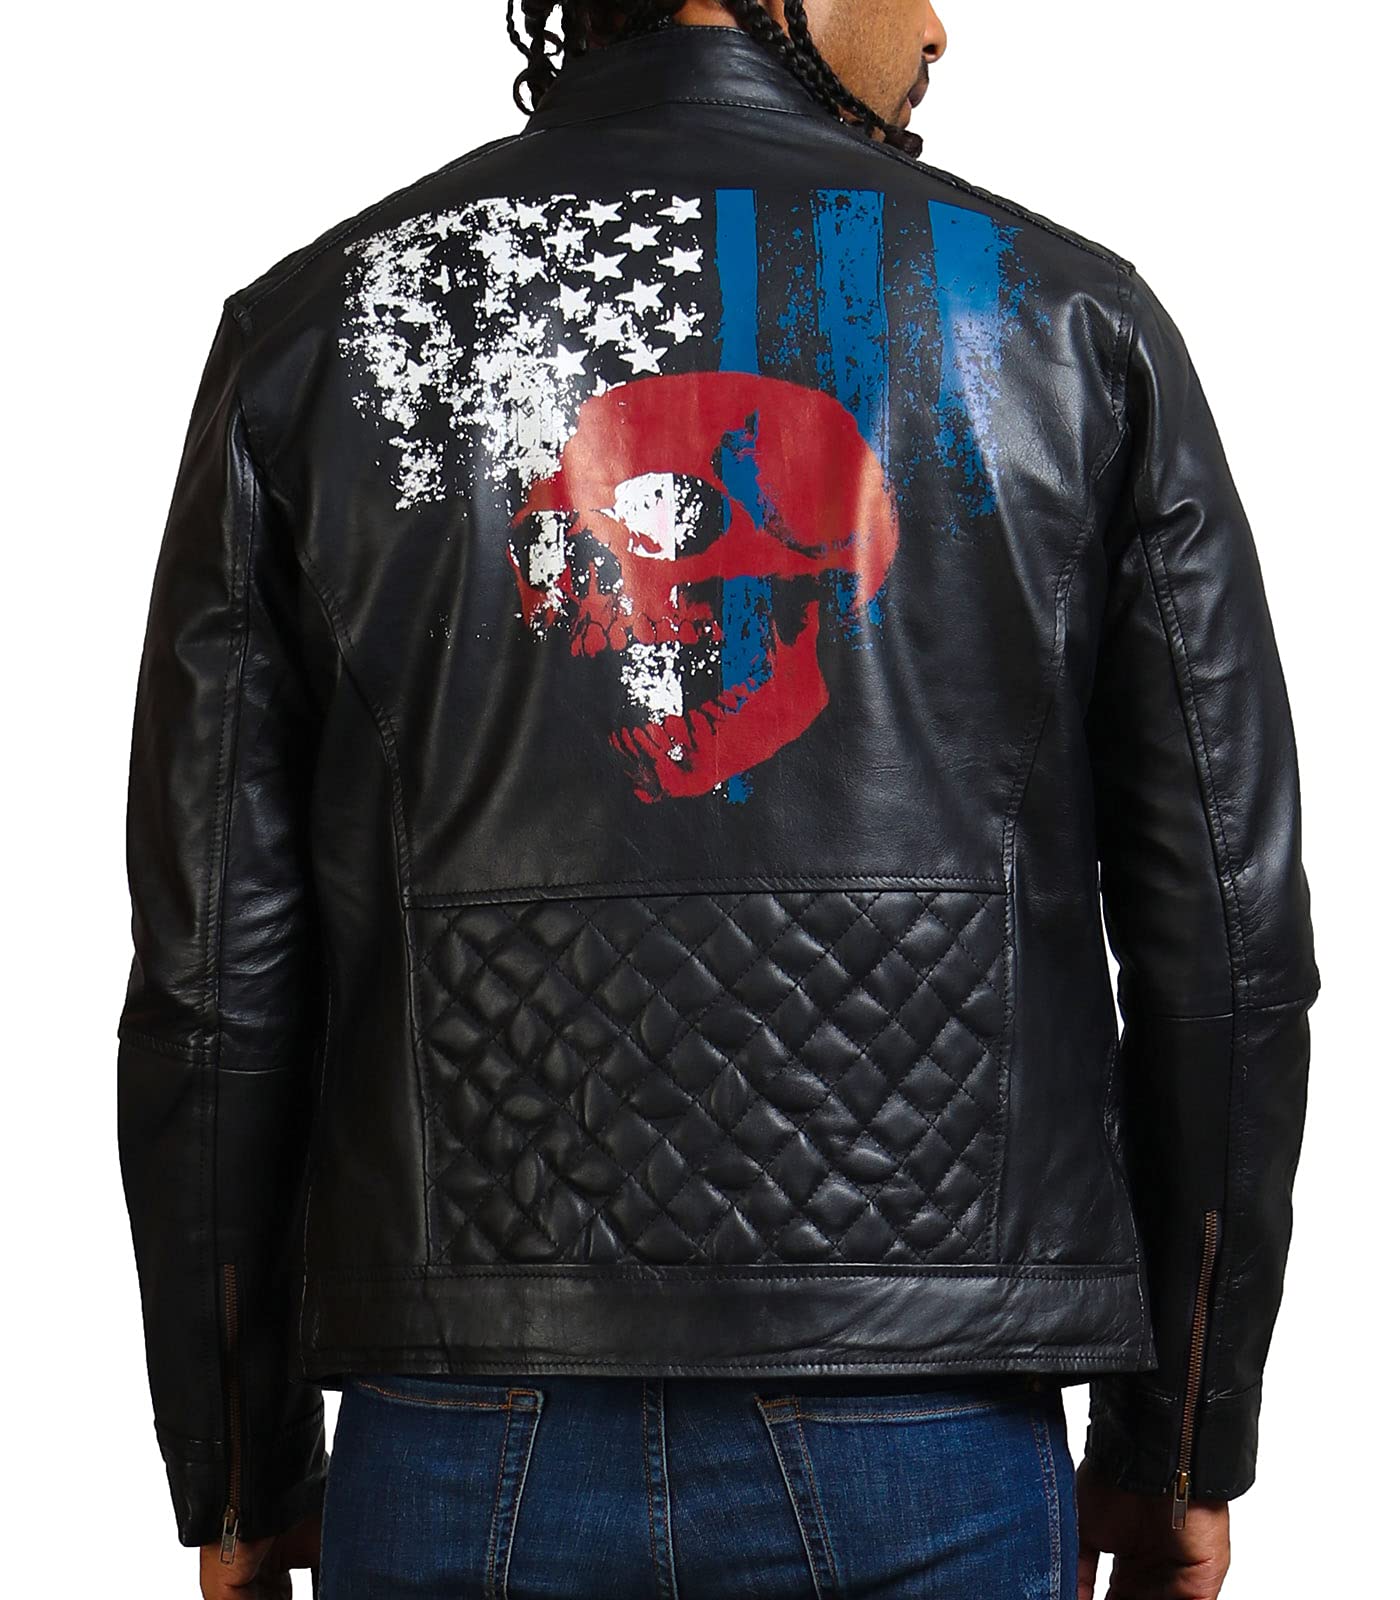 American Flag Skull Jacket | Shop with Confidence